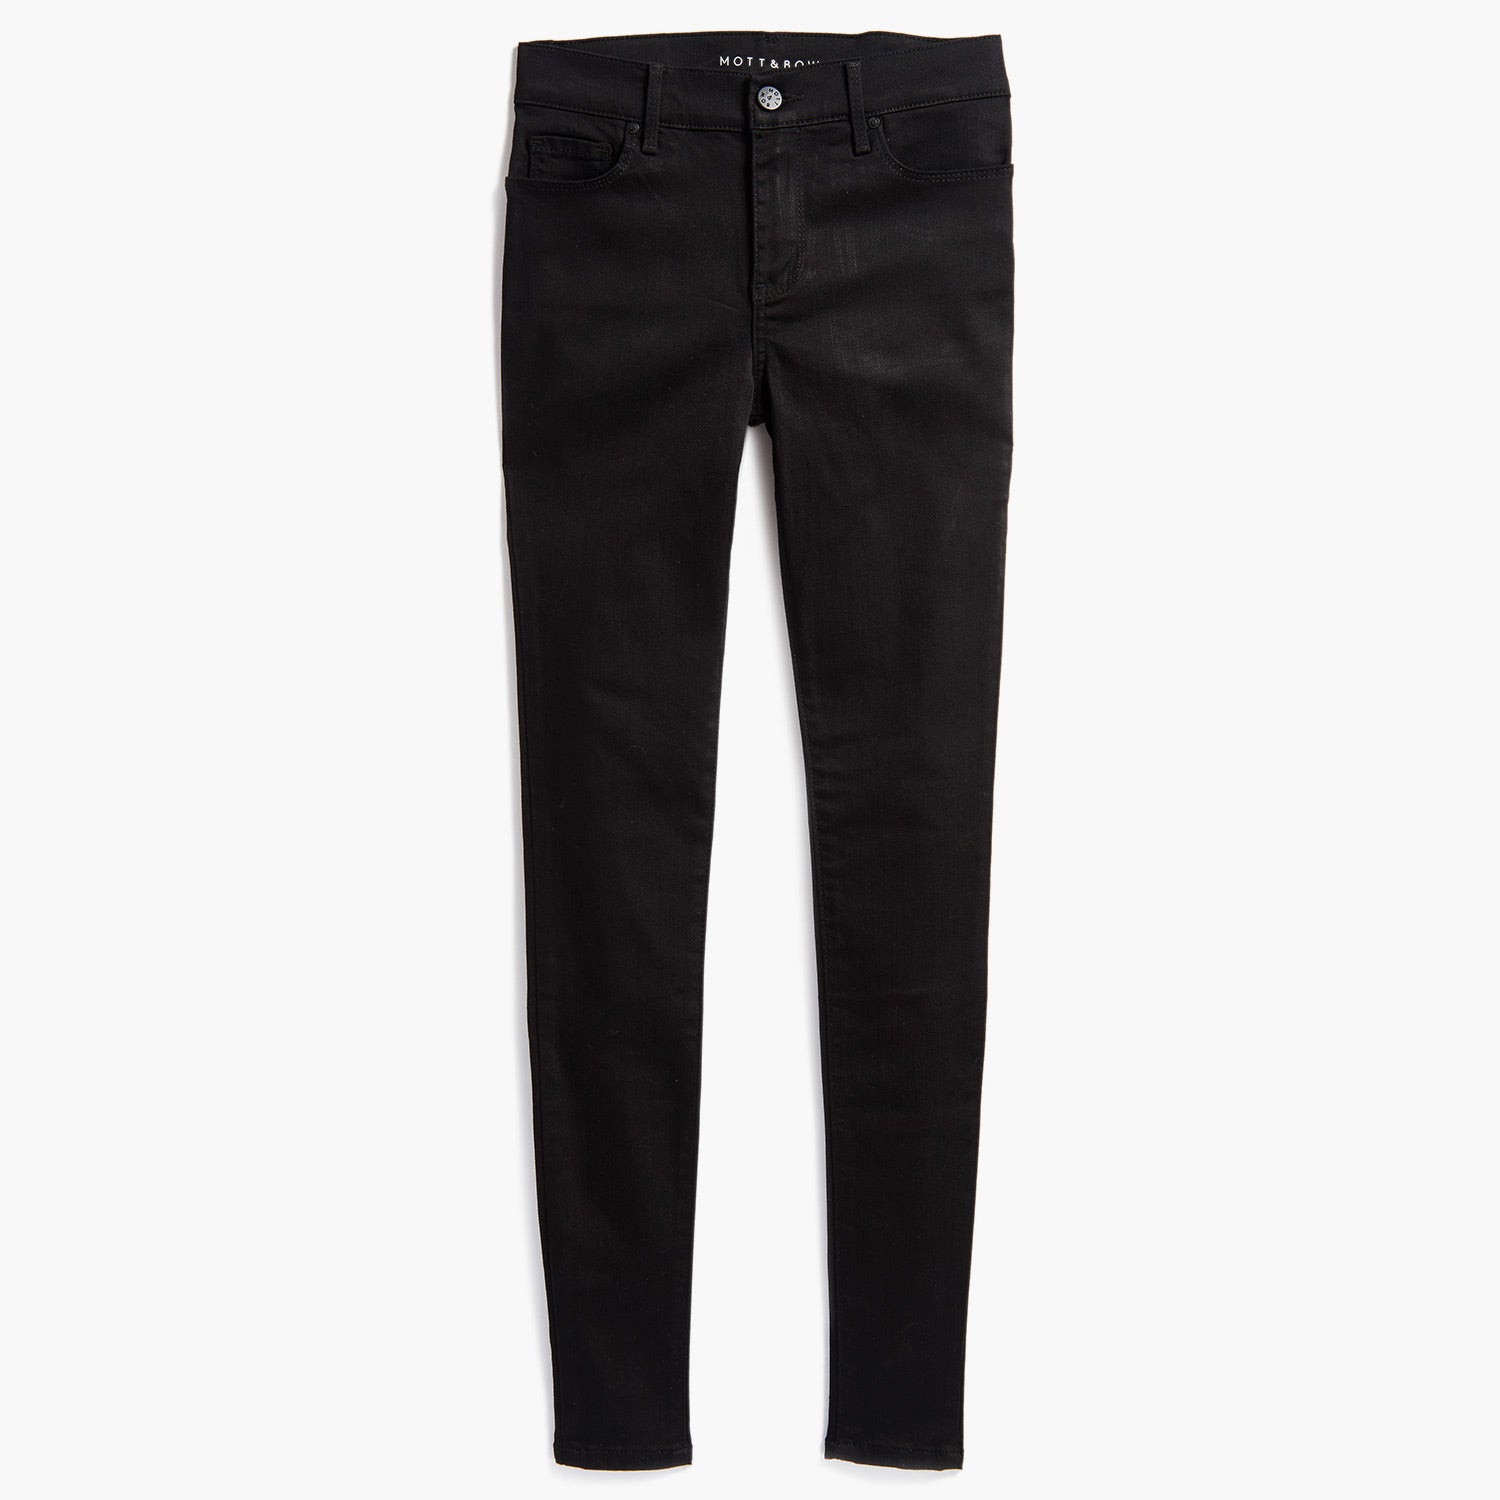 Baron Boutique Womens Mid Rise Skinny Pants